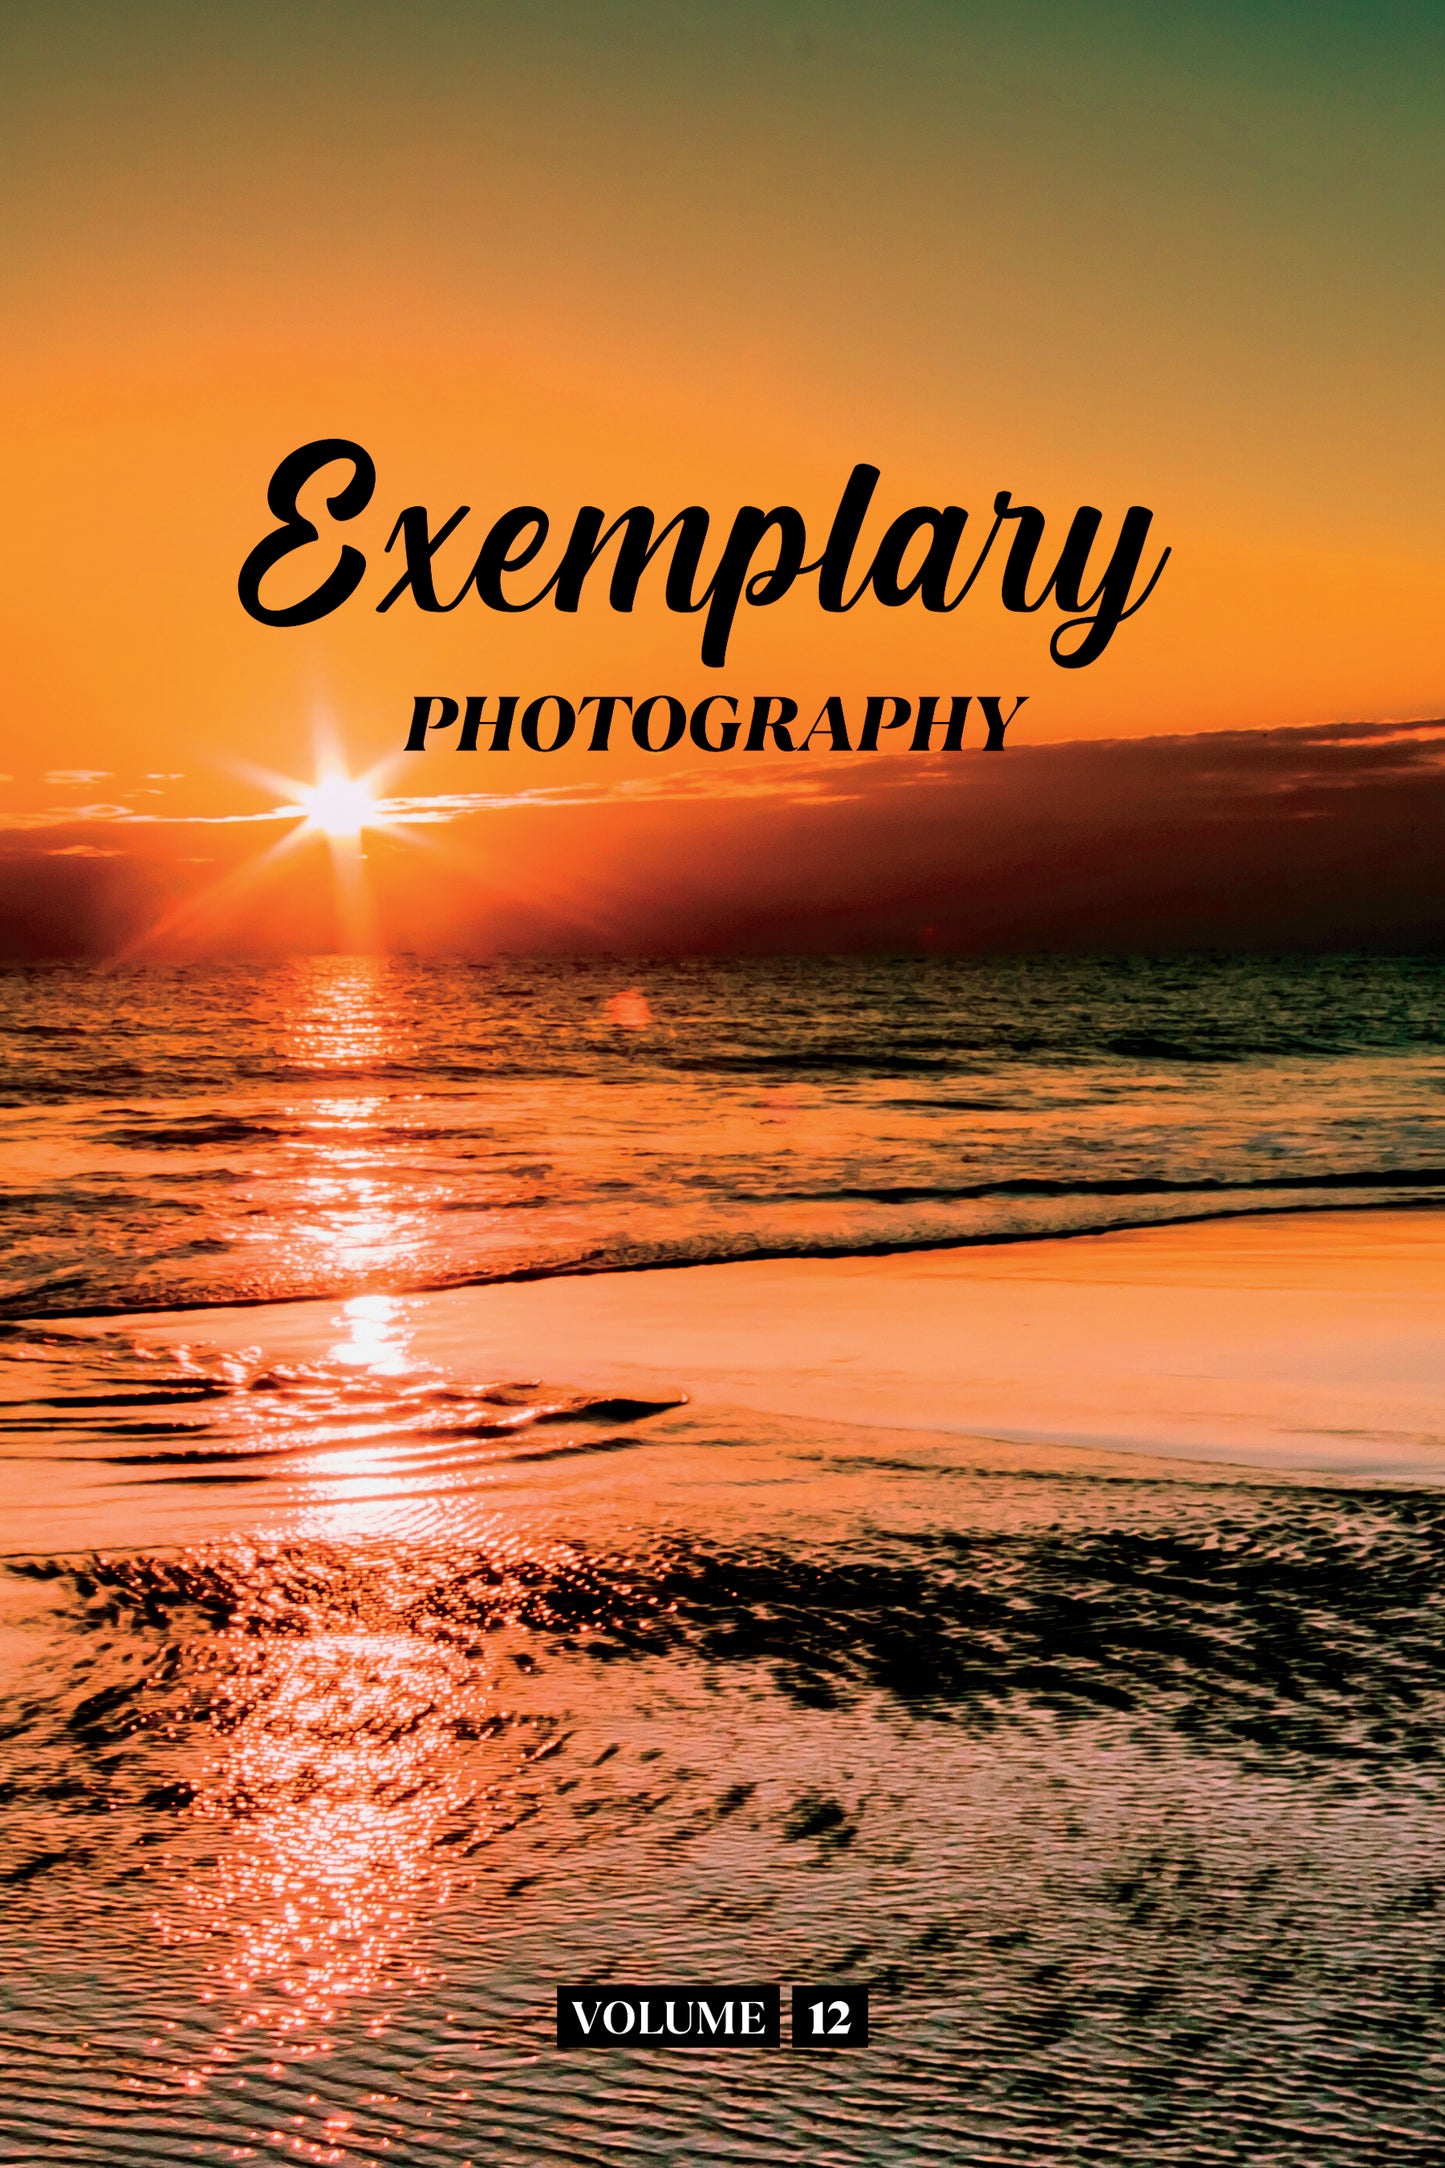 Exemplary Photography Volume 12 (Physical Book)